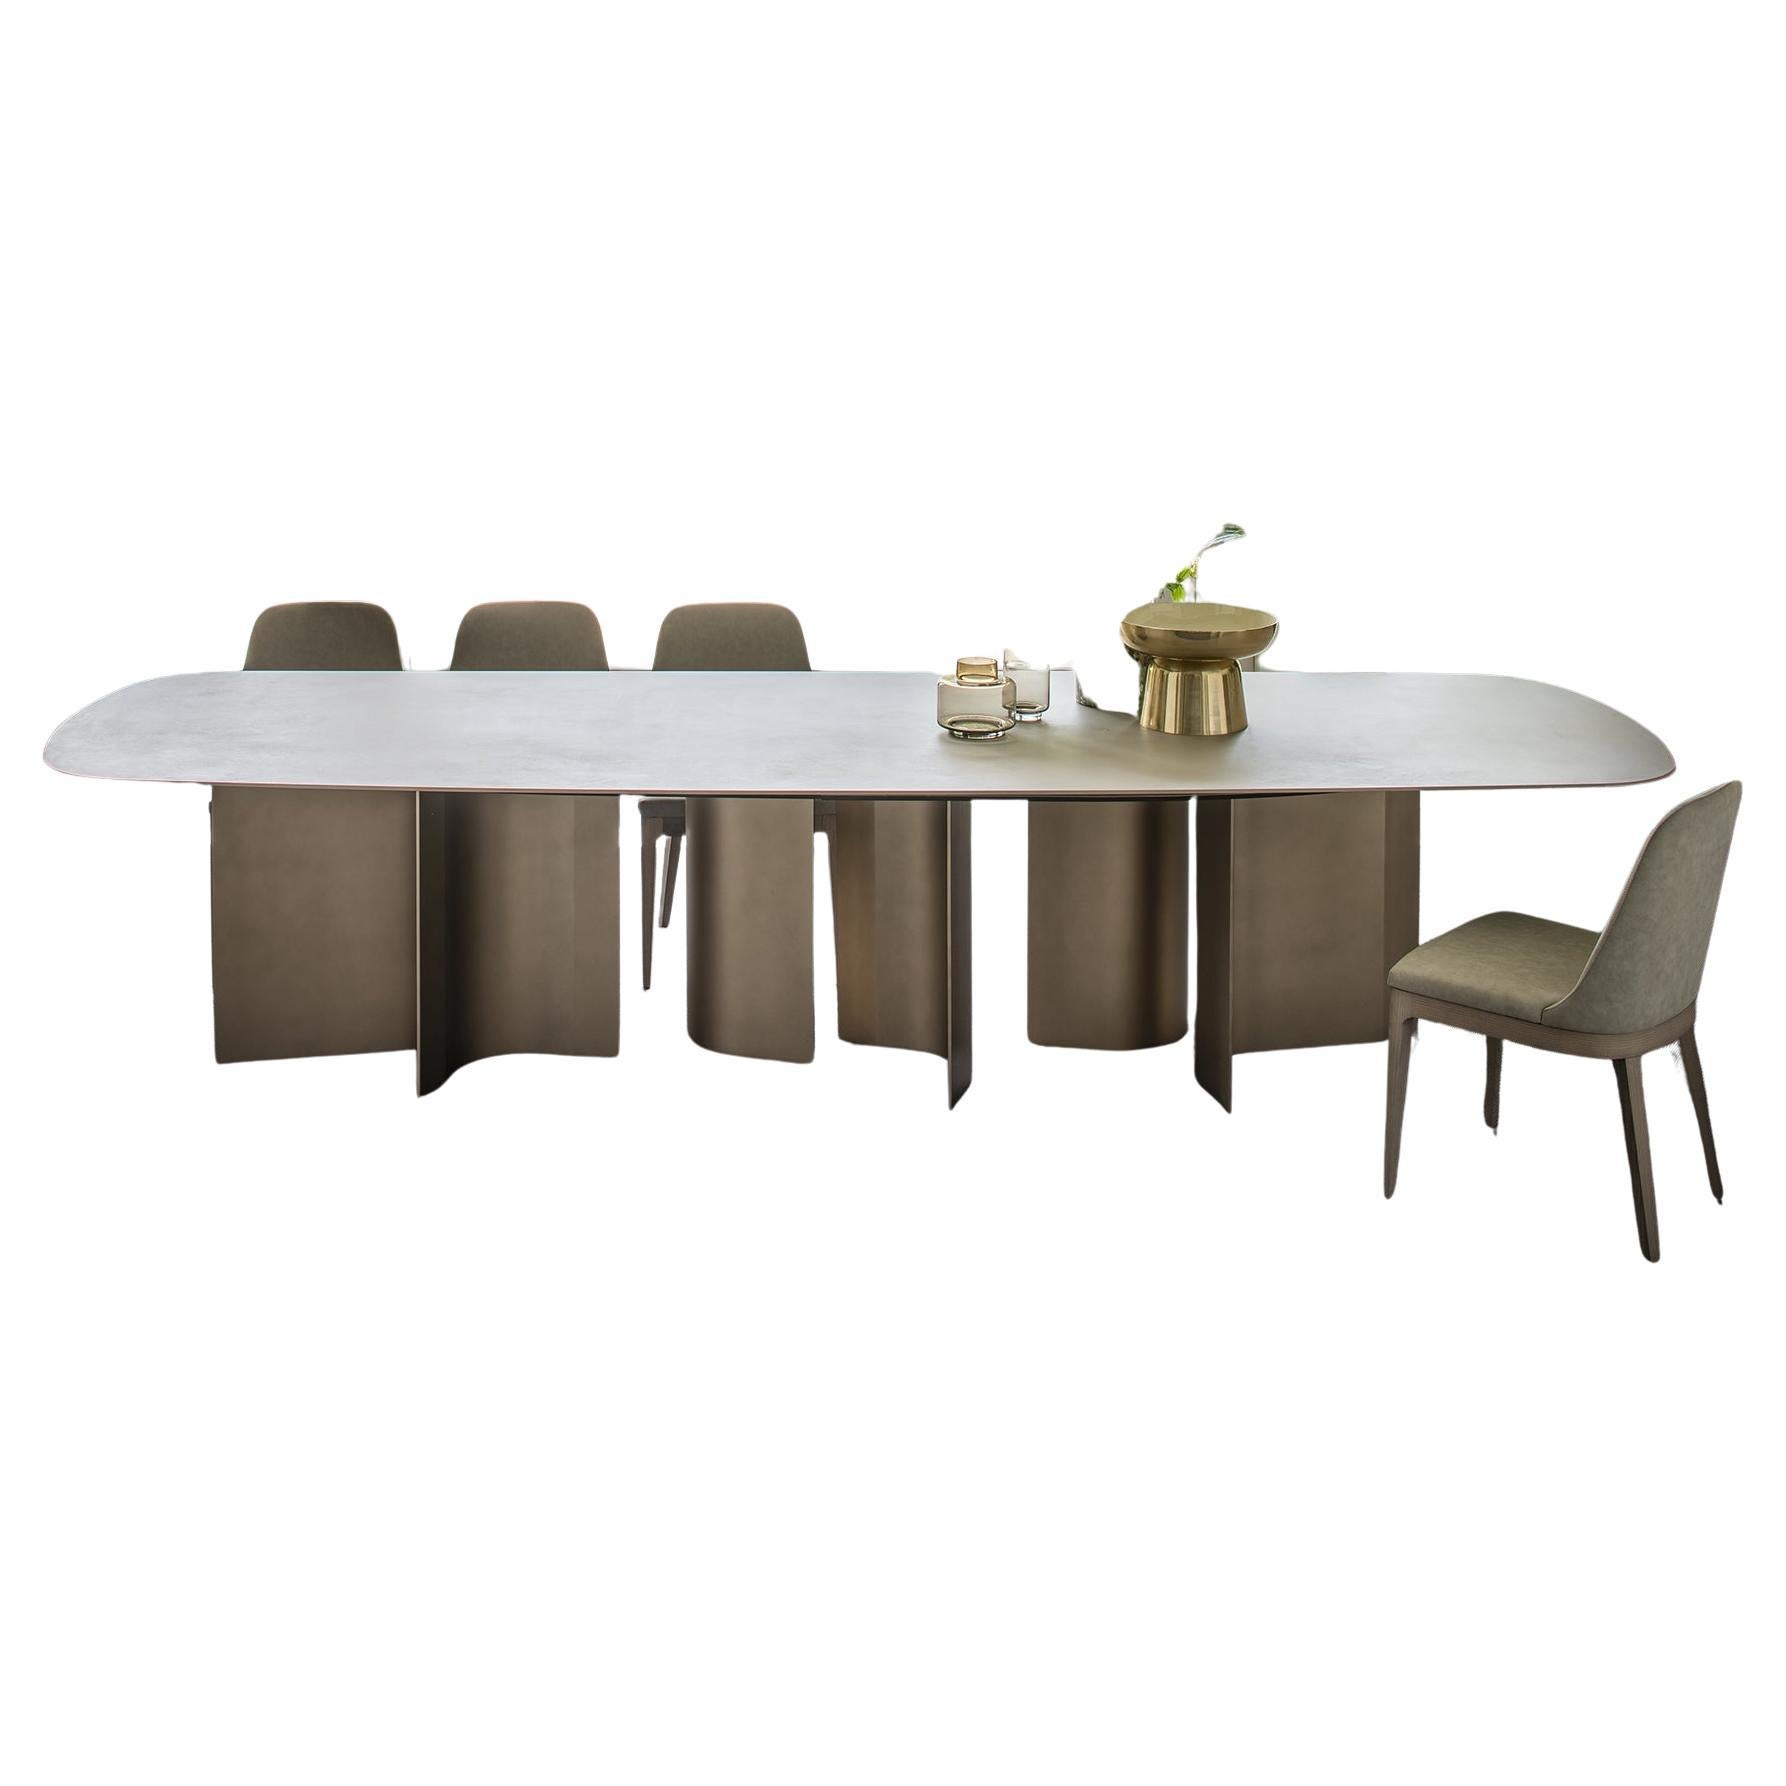 Contemporary Table Wood Clay and Bronzo Lacquered by Studio Oxi